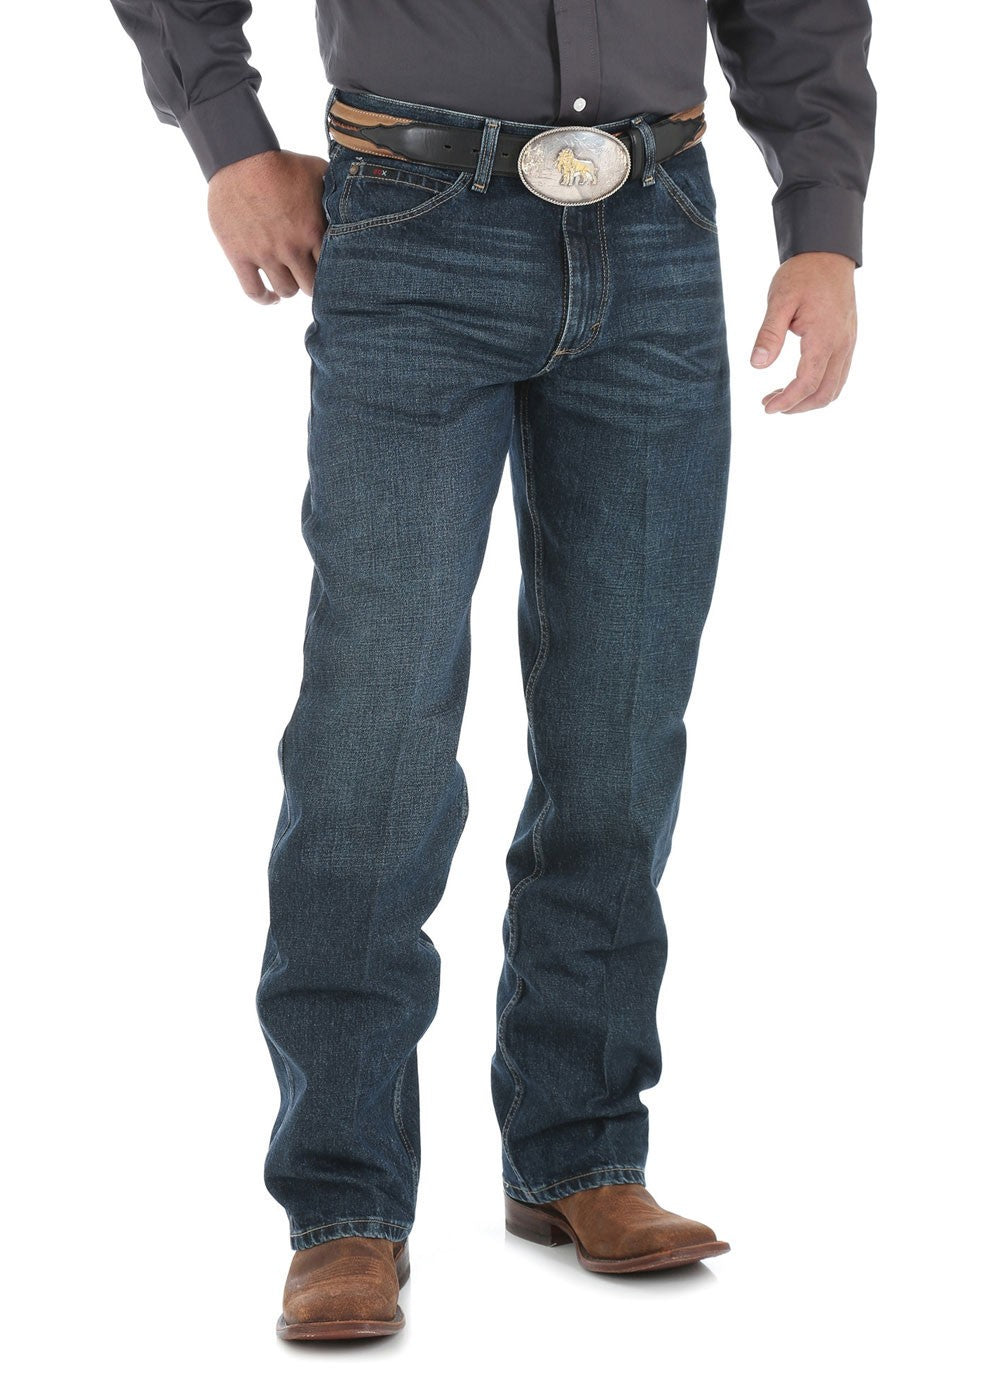 Wrangler 20X Competition Deep Blue Jean